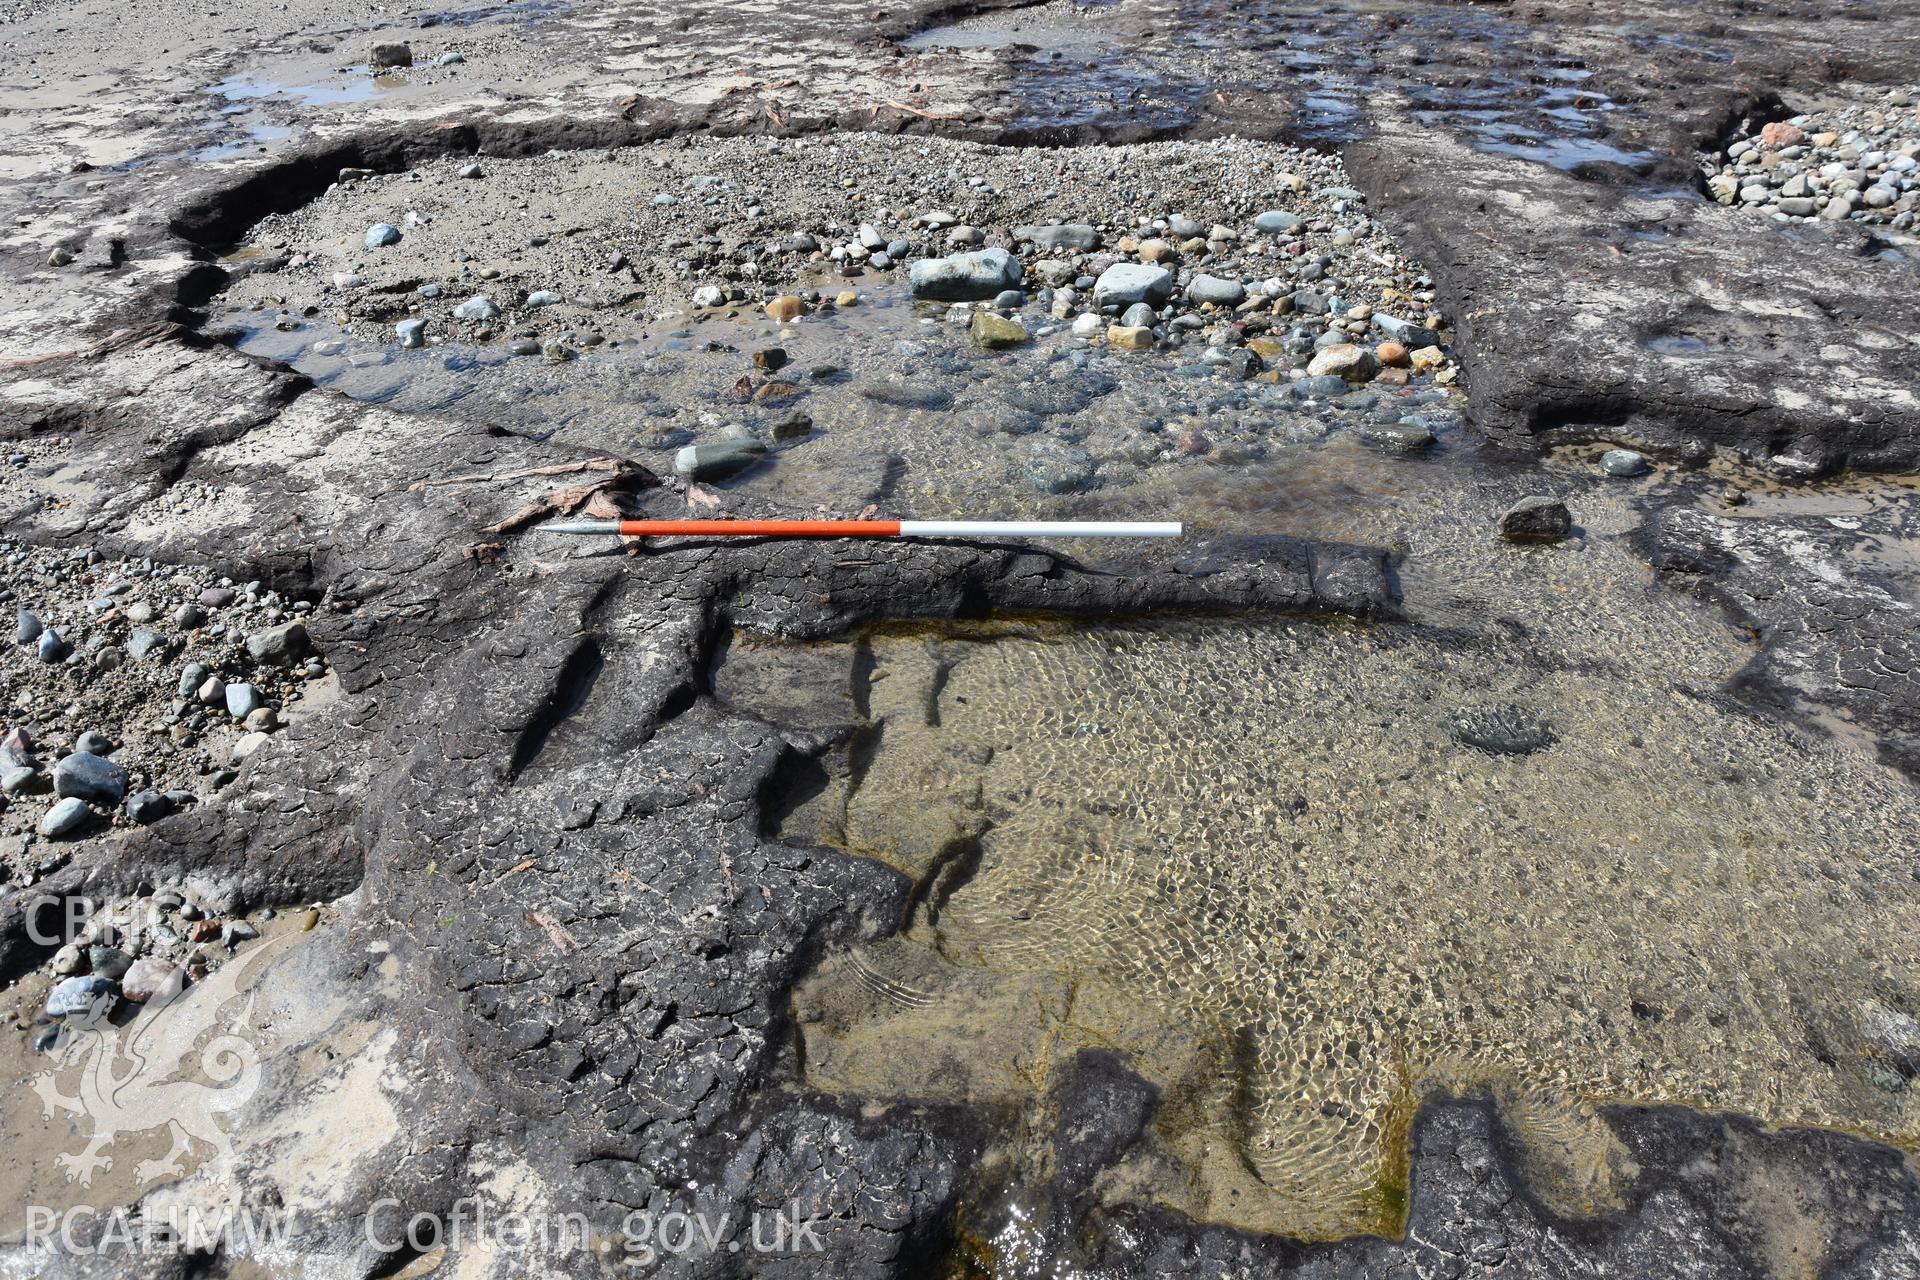 Photography of medieval or post-medieval peat cuttings preserved in the eastern part of the peats on The Warren beach, Abersoch. Recorded with GNSS and photogrammetry for the CHERISH Project. ? Crown: CHERISH PROJECT 2018. Produced with EU funds through the Ireland Wales Co-operation Programme 2014-2020. All material made freely available through the Open Government Licence.